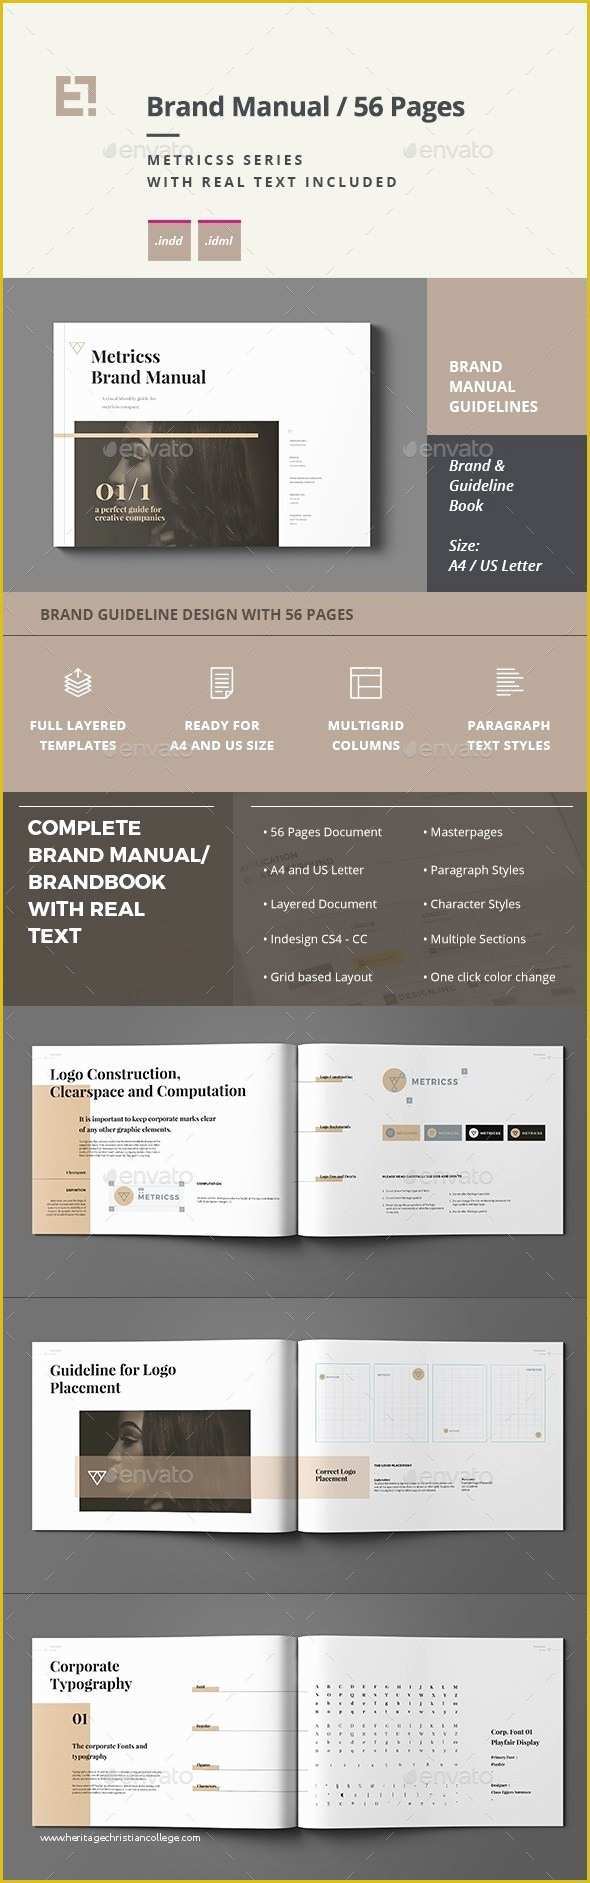 Brand Guidelines Template Indesign Free Of 25 Indesign Brand Guidelines Templates